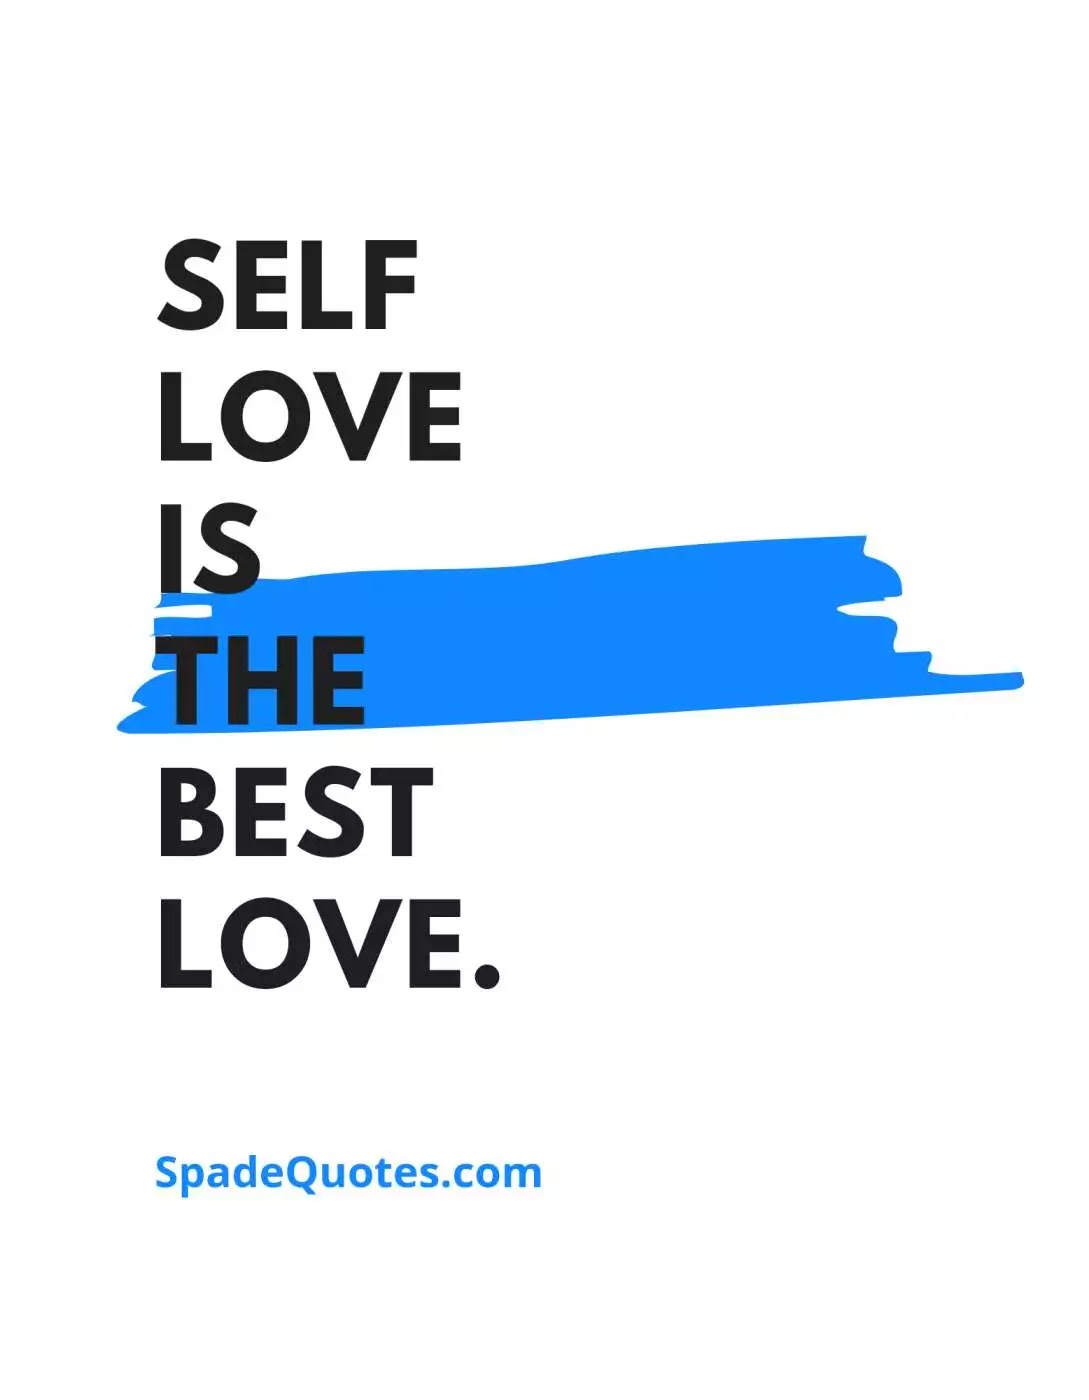 Self-love-is-the-best-love-love-captions-for-selfies-spadequotes